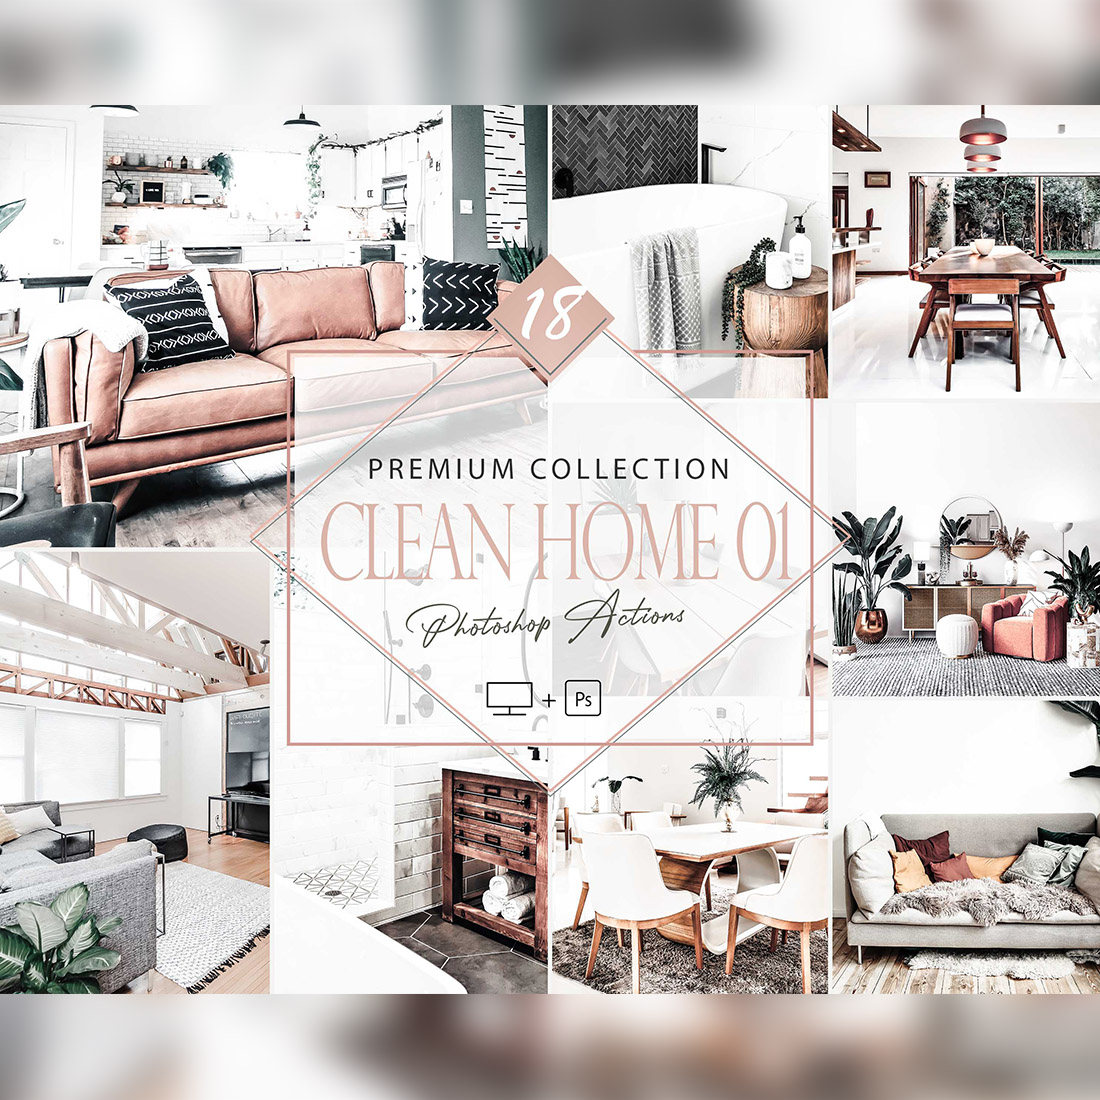 18 Clean Home 01 Photoshop Actions, Real Estate ACR Preset, White House Ps Filter, Portrait And Lifestyle Theme For Instagram, Blogger, Autumn Outdoor cover image.